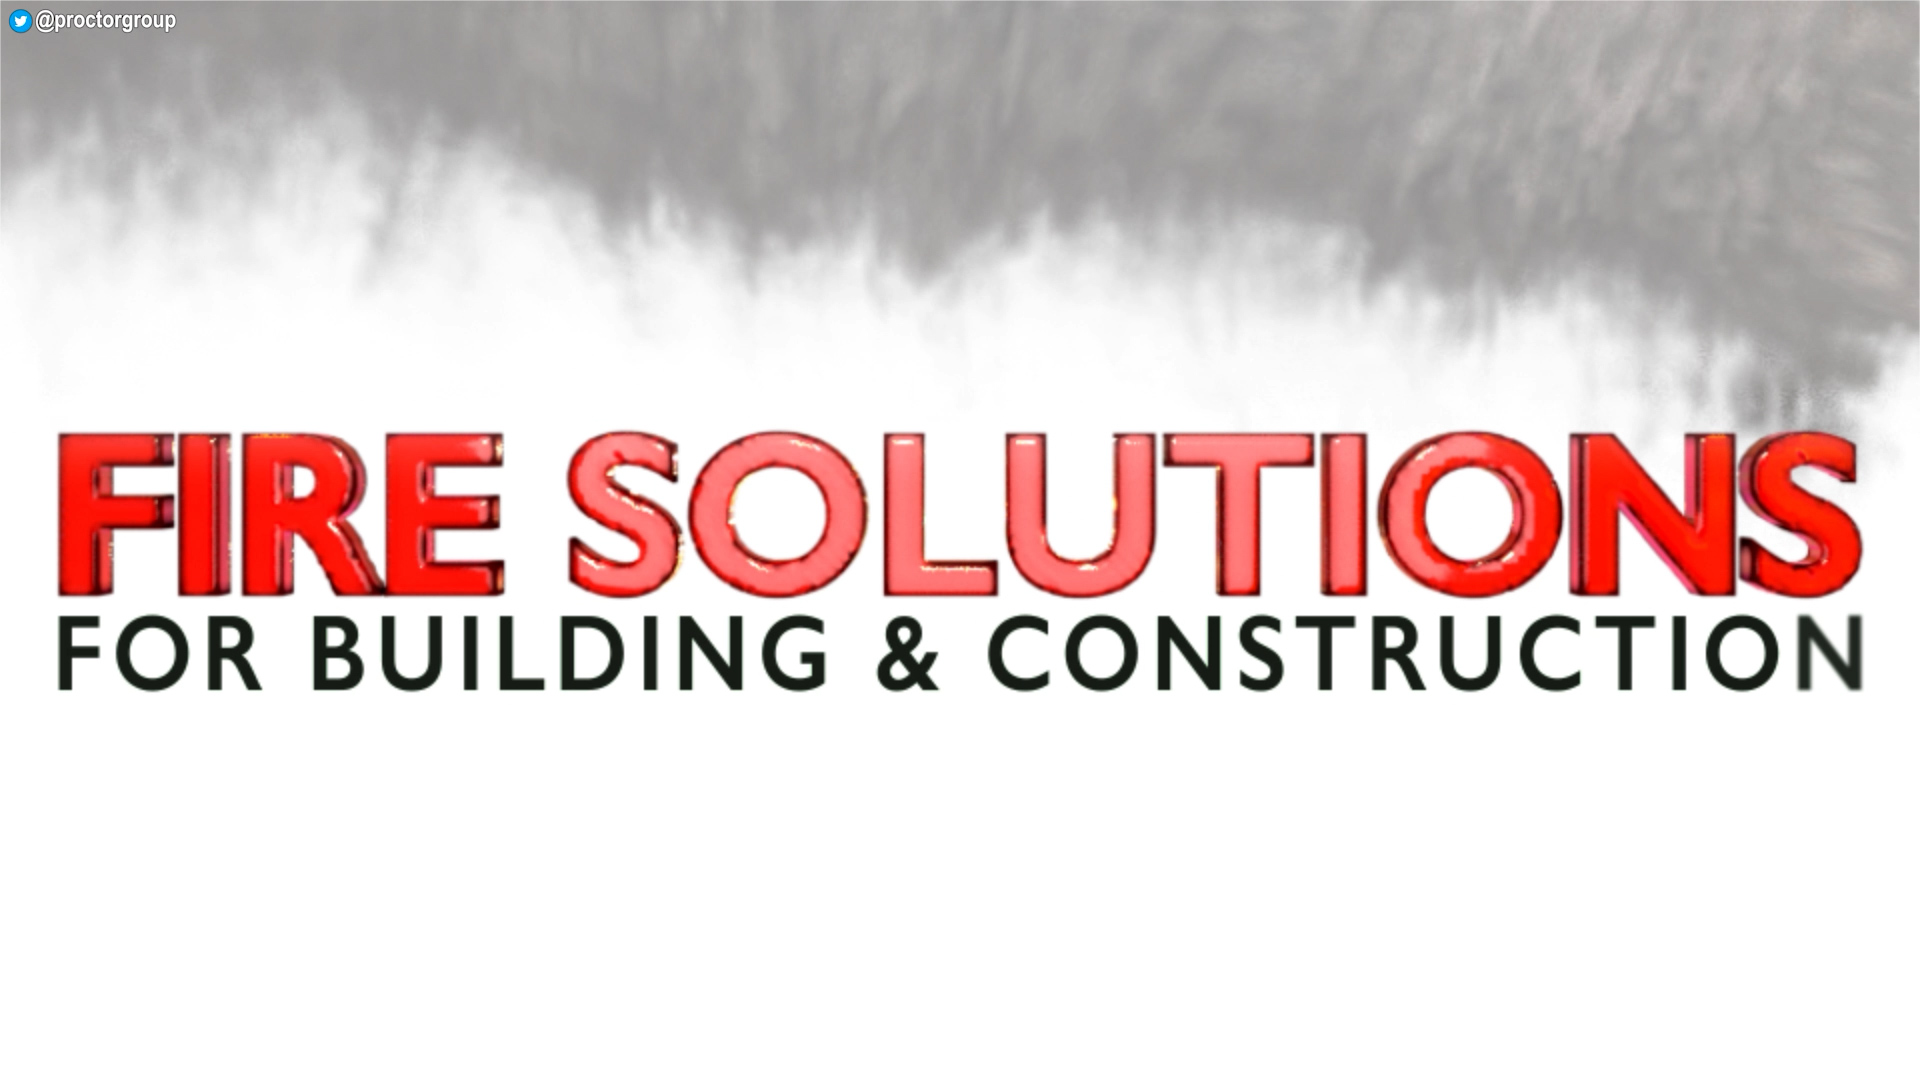 Fire Solutions for Building & Construction